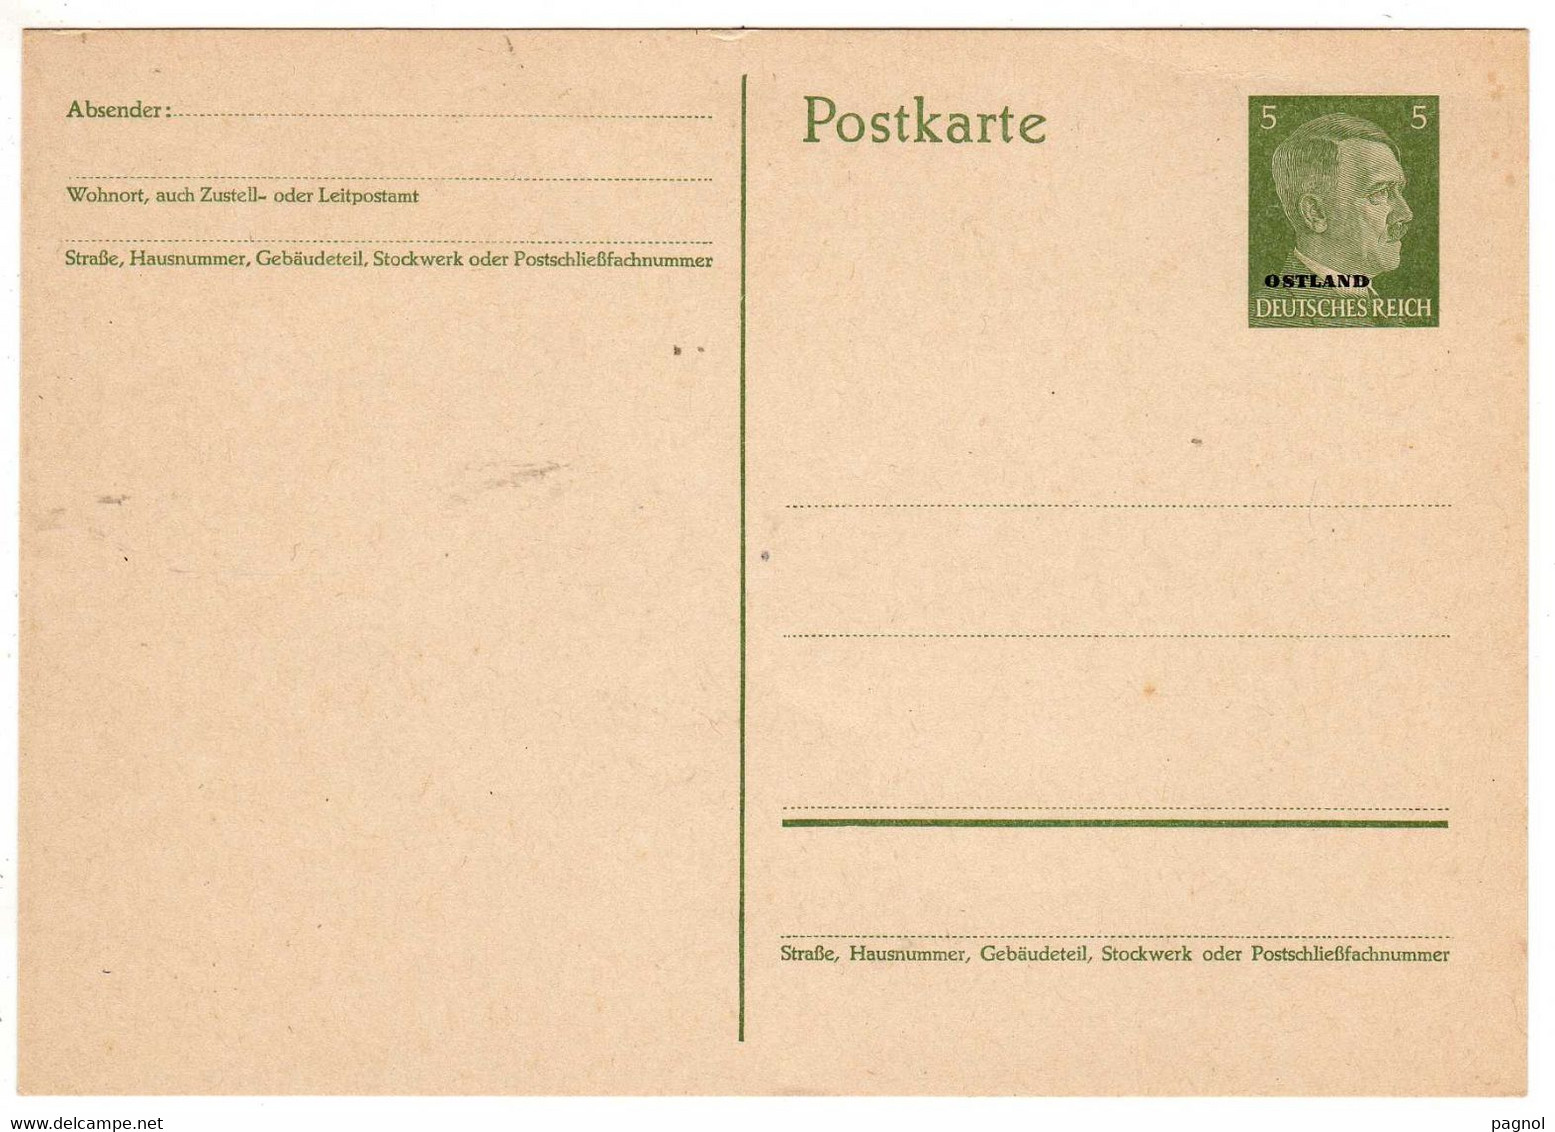 Pays Baltes : Ostland : Entiers Postaux : Occupation Allemagne 1942 - Europe (Other)